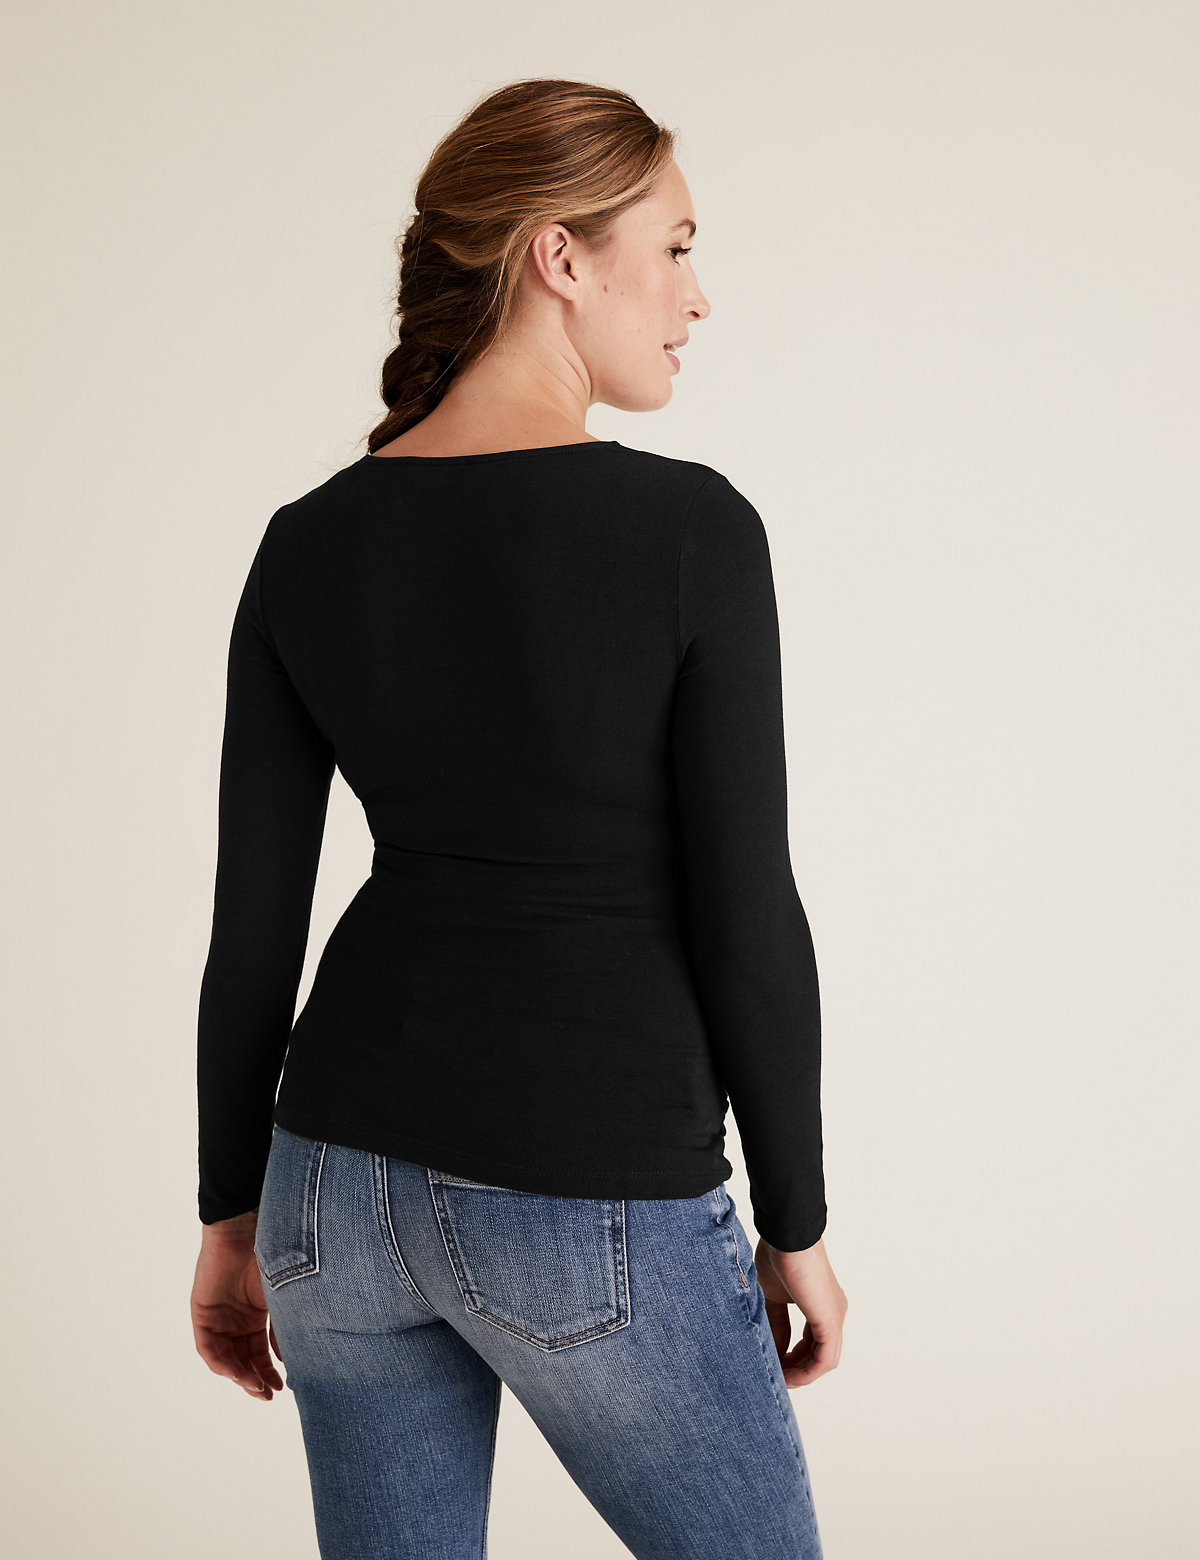 Maternity Cotton Fitted Nursing Top